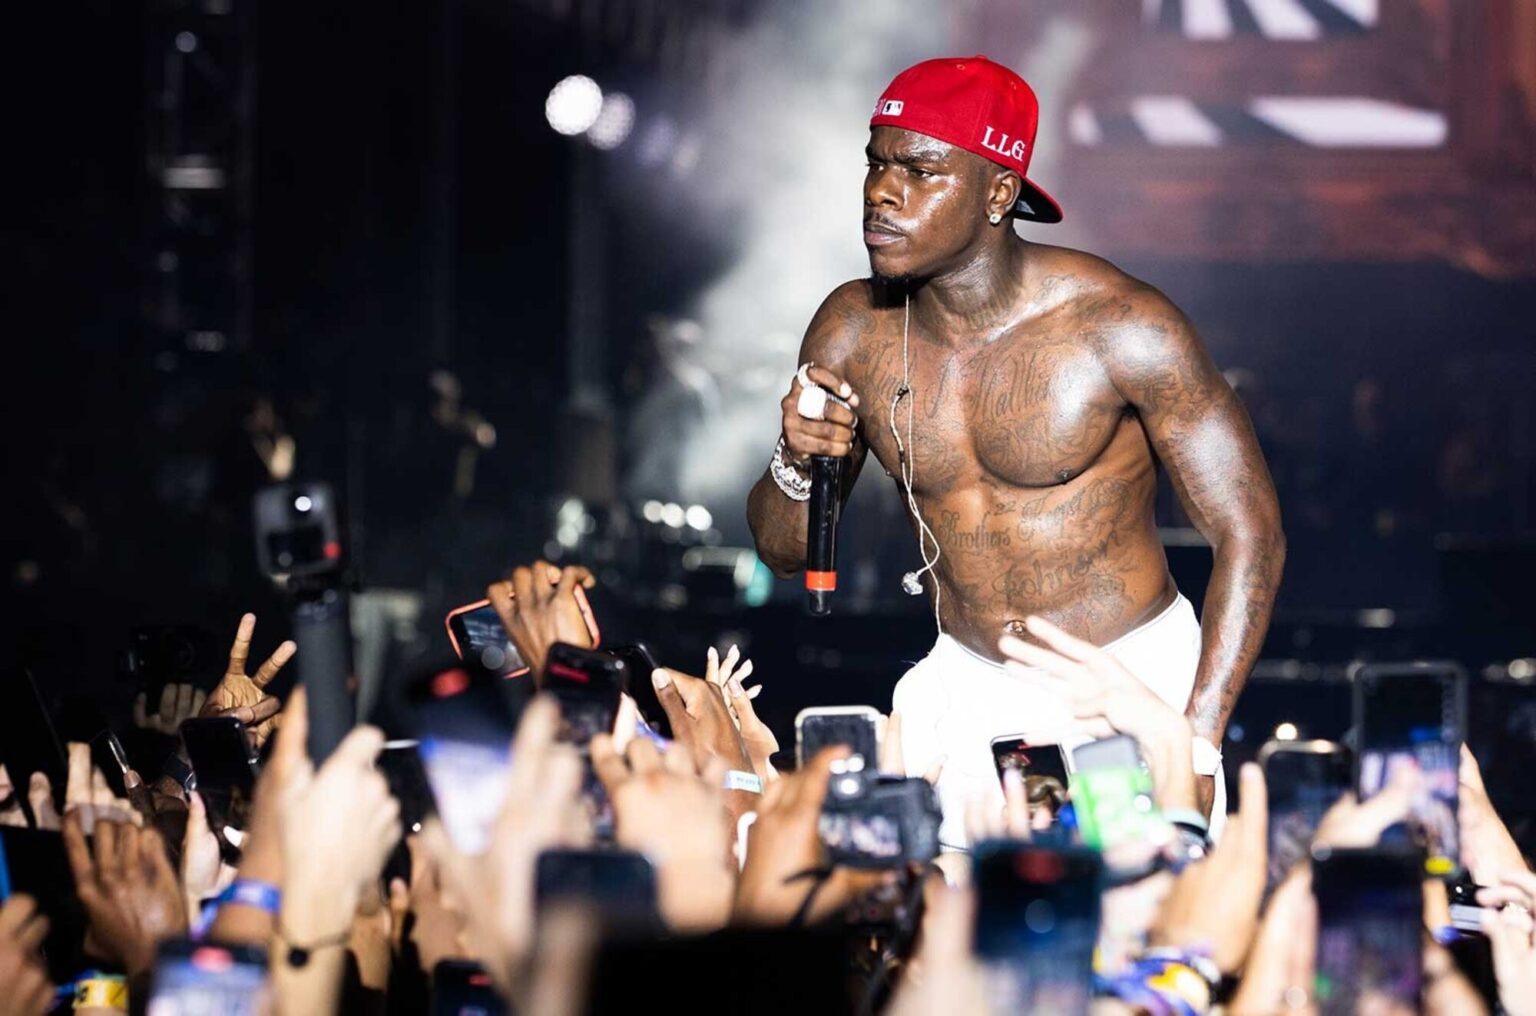 Is DaBaby and his songs really cancelled for good? After receiving tons of backlash, find out how the rapper is making a second attempt at an apology here.